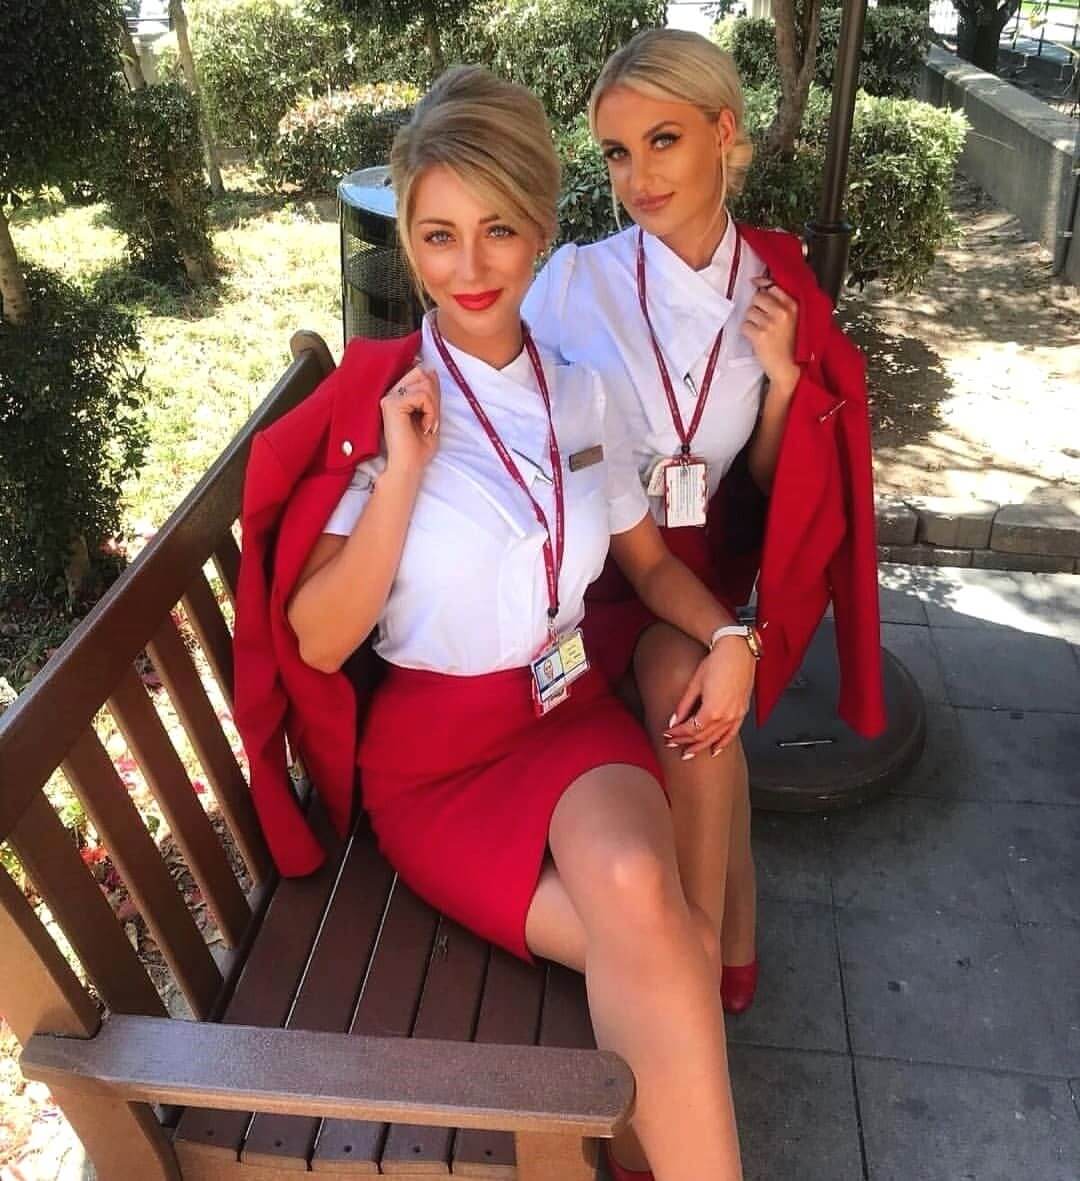 The Shockingly Raunchy Snaps Taken By Some Of Hottest Female Cabin Crew In The World! 4